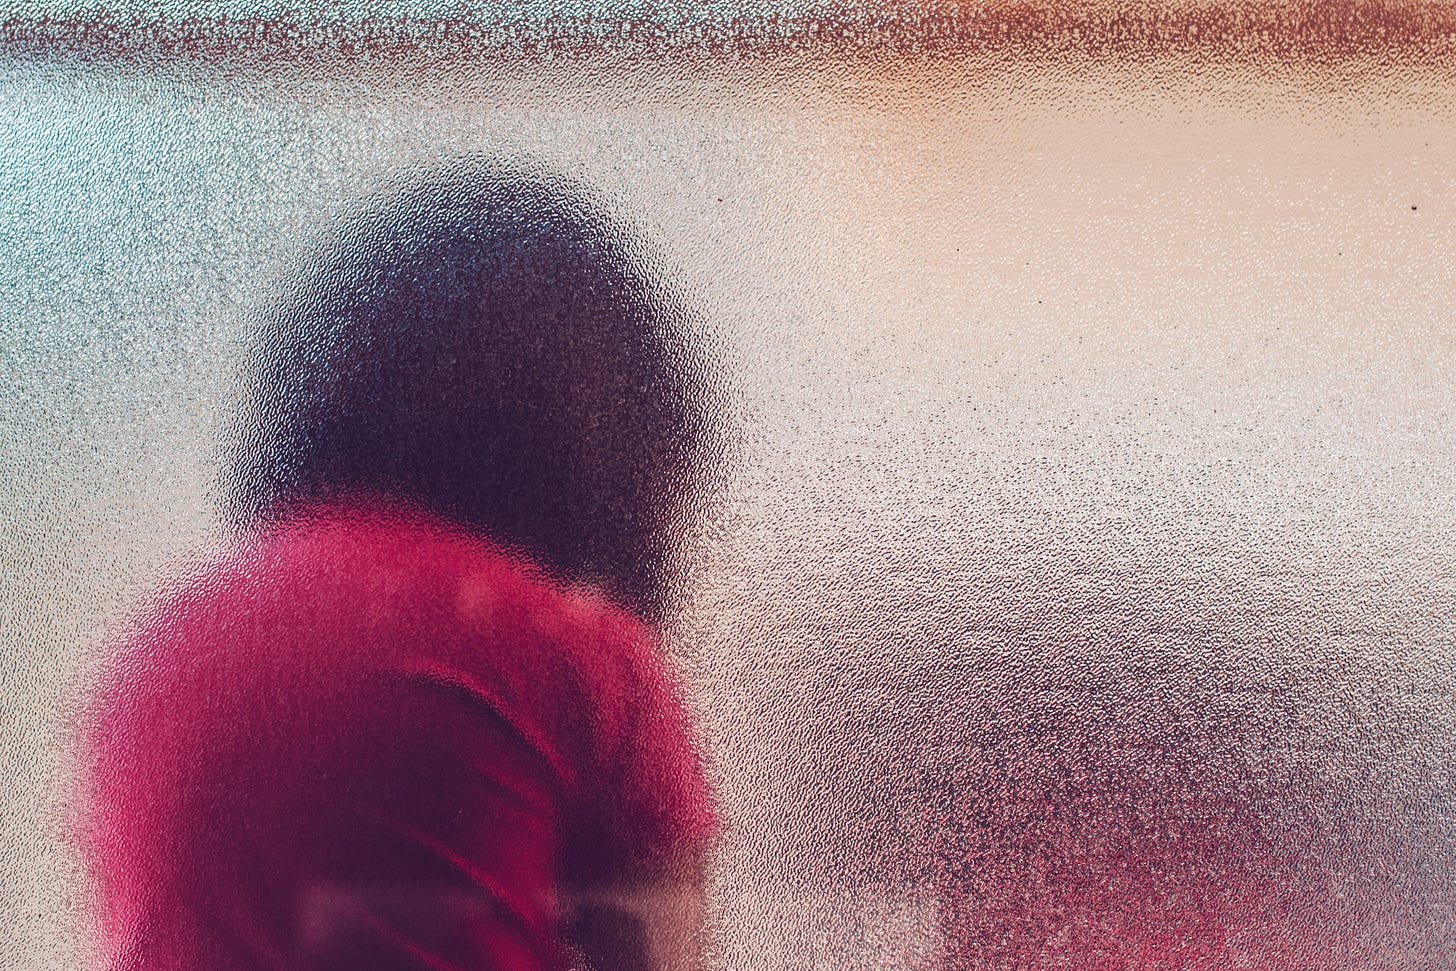 A child hangs their head sadly behind an opaque pane of glass.